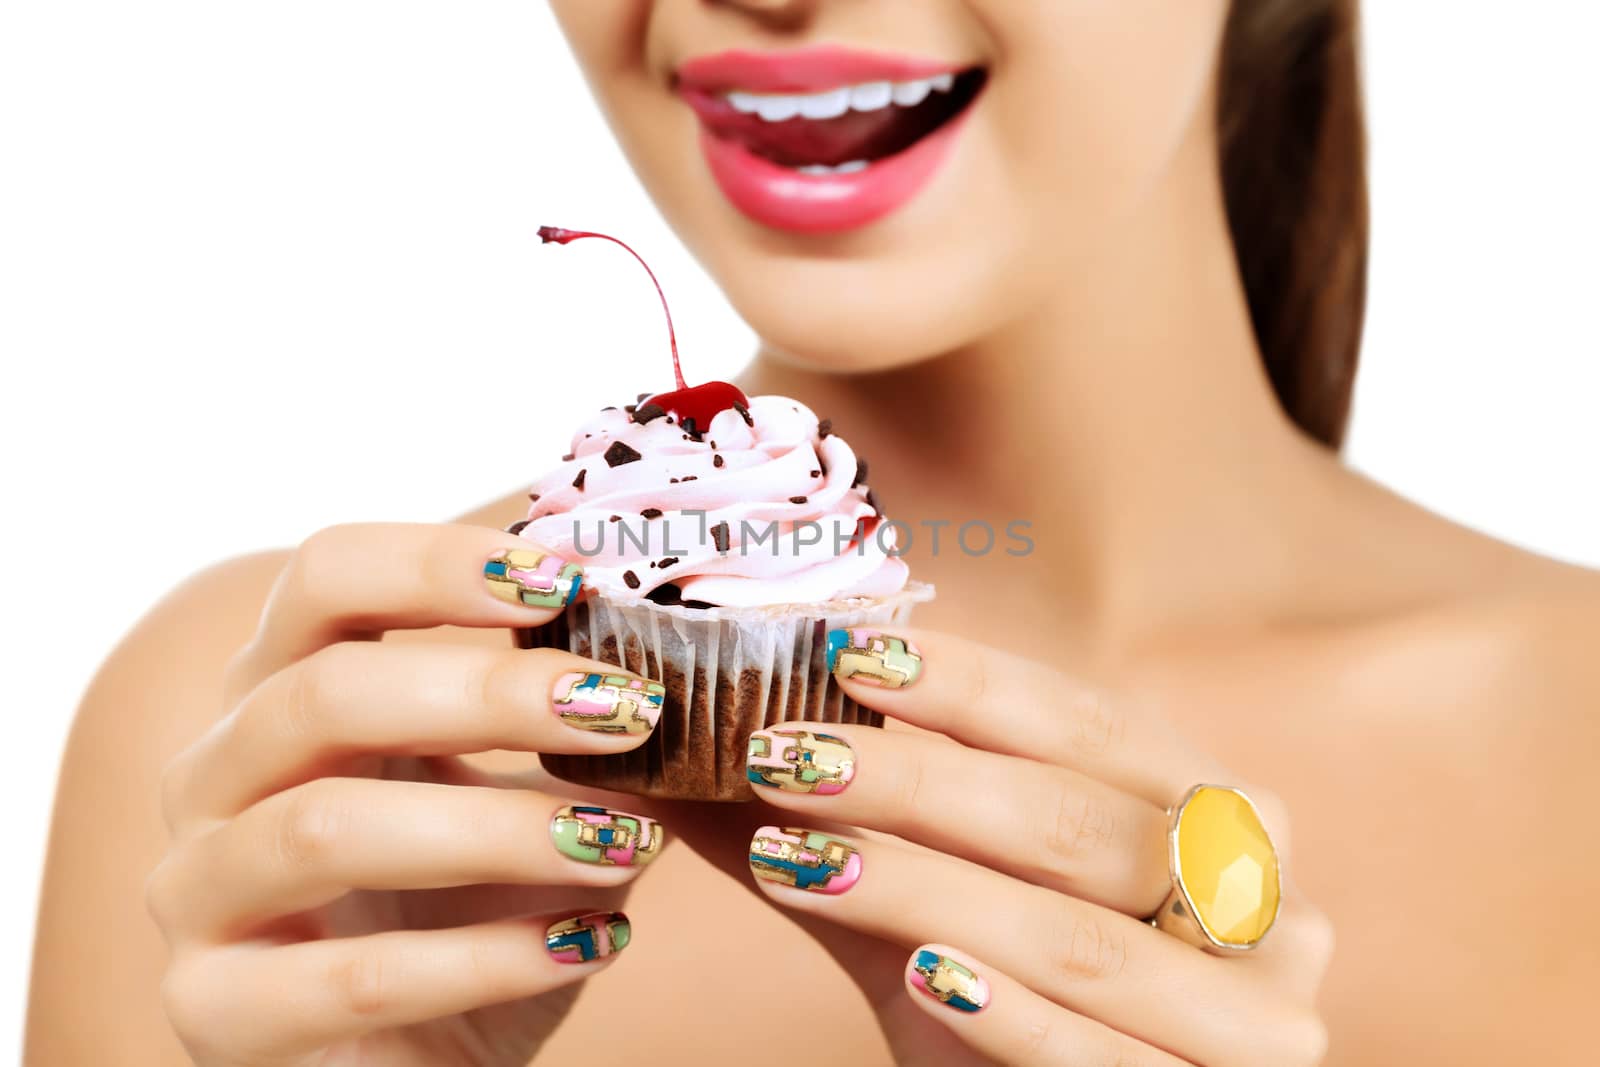 Woman wants to eat a cupcake